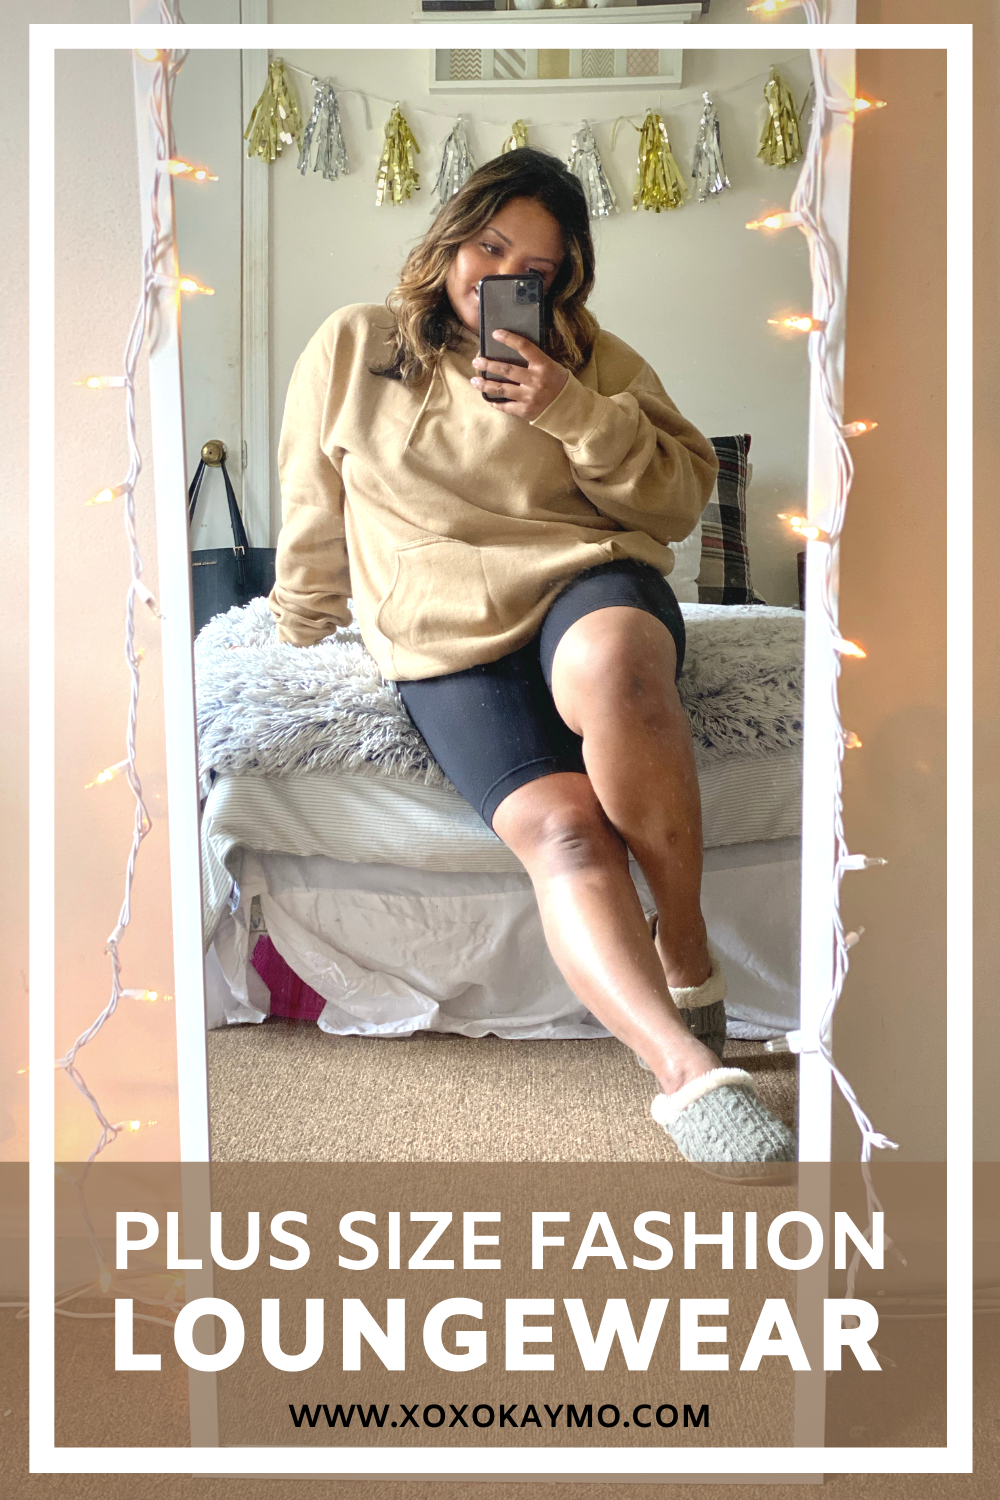 How to style plus size loungewear